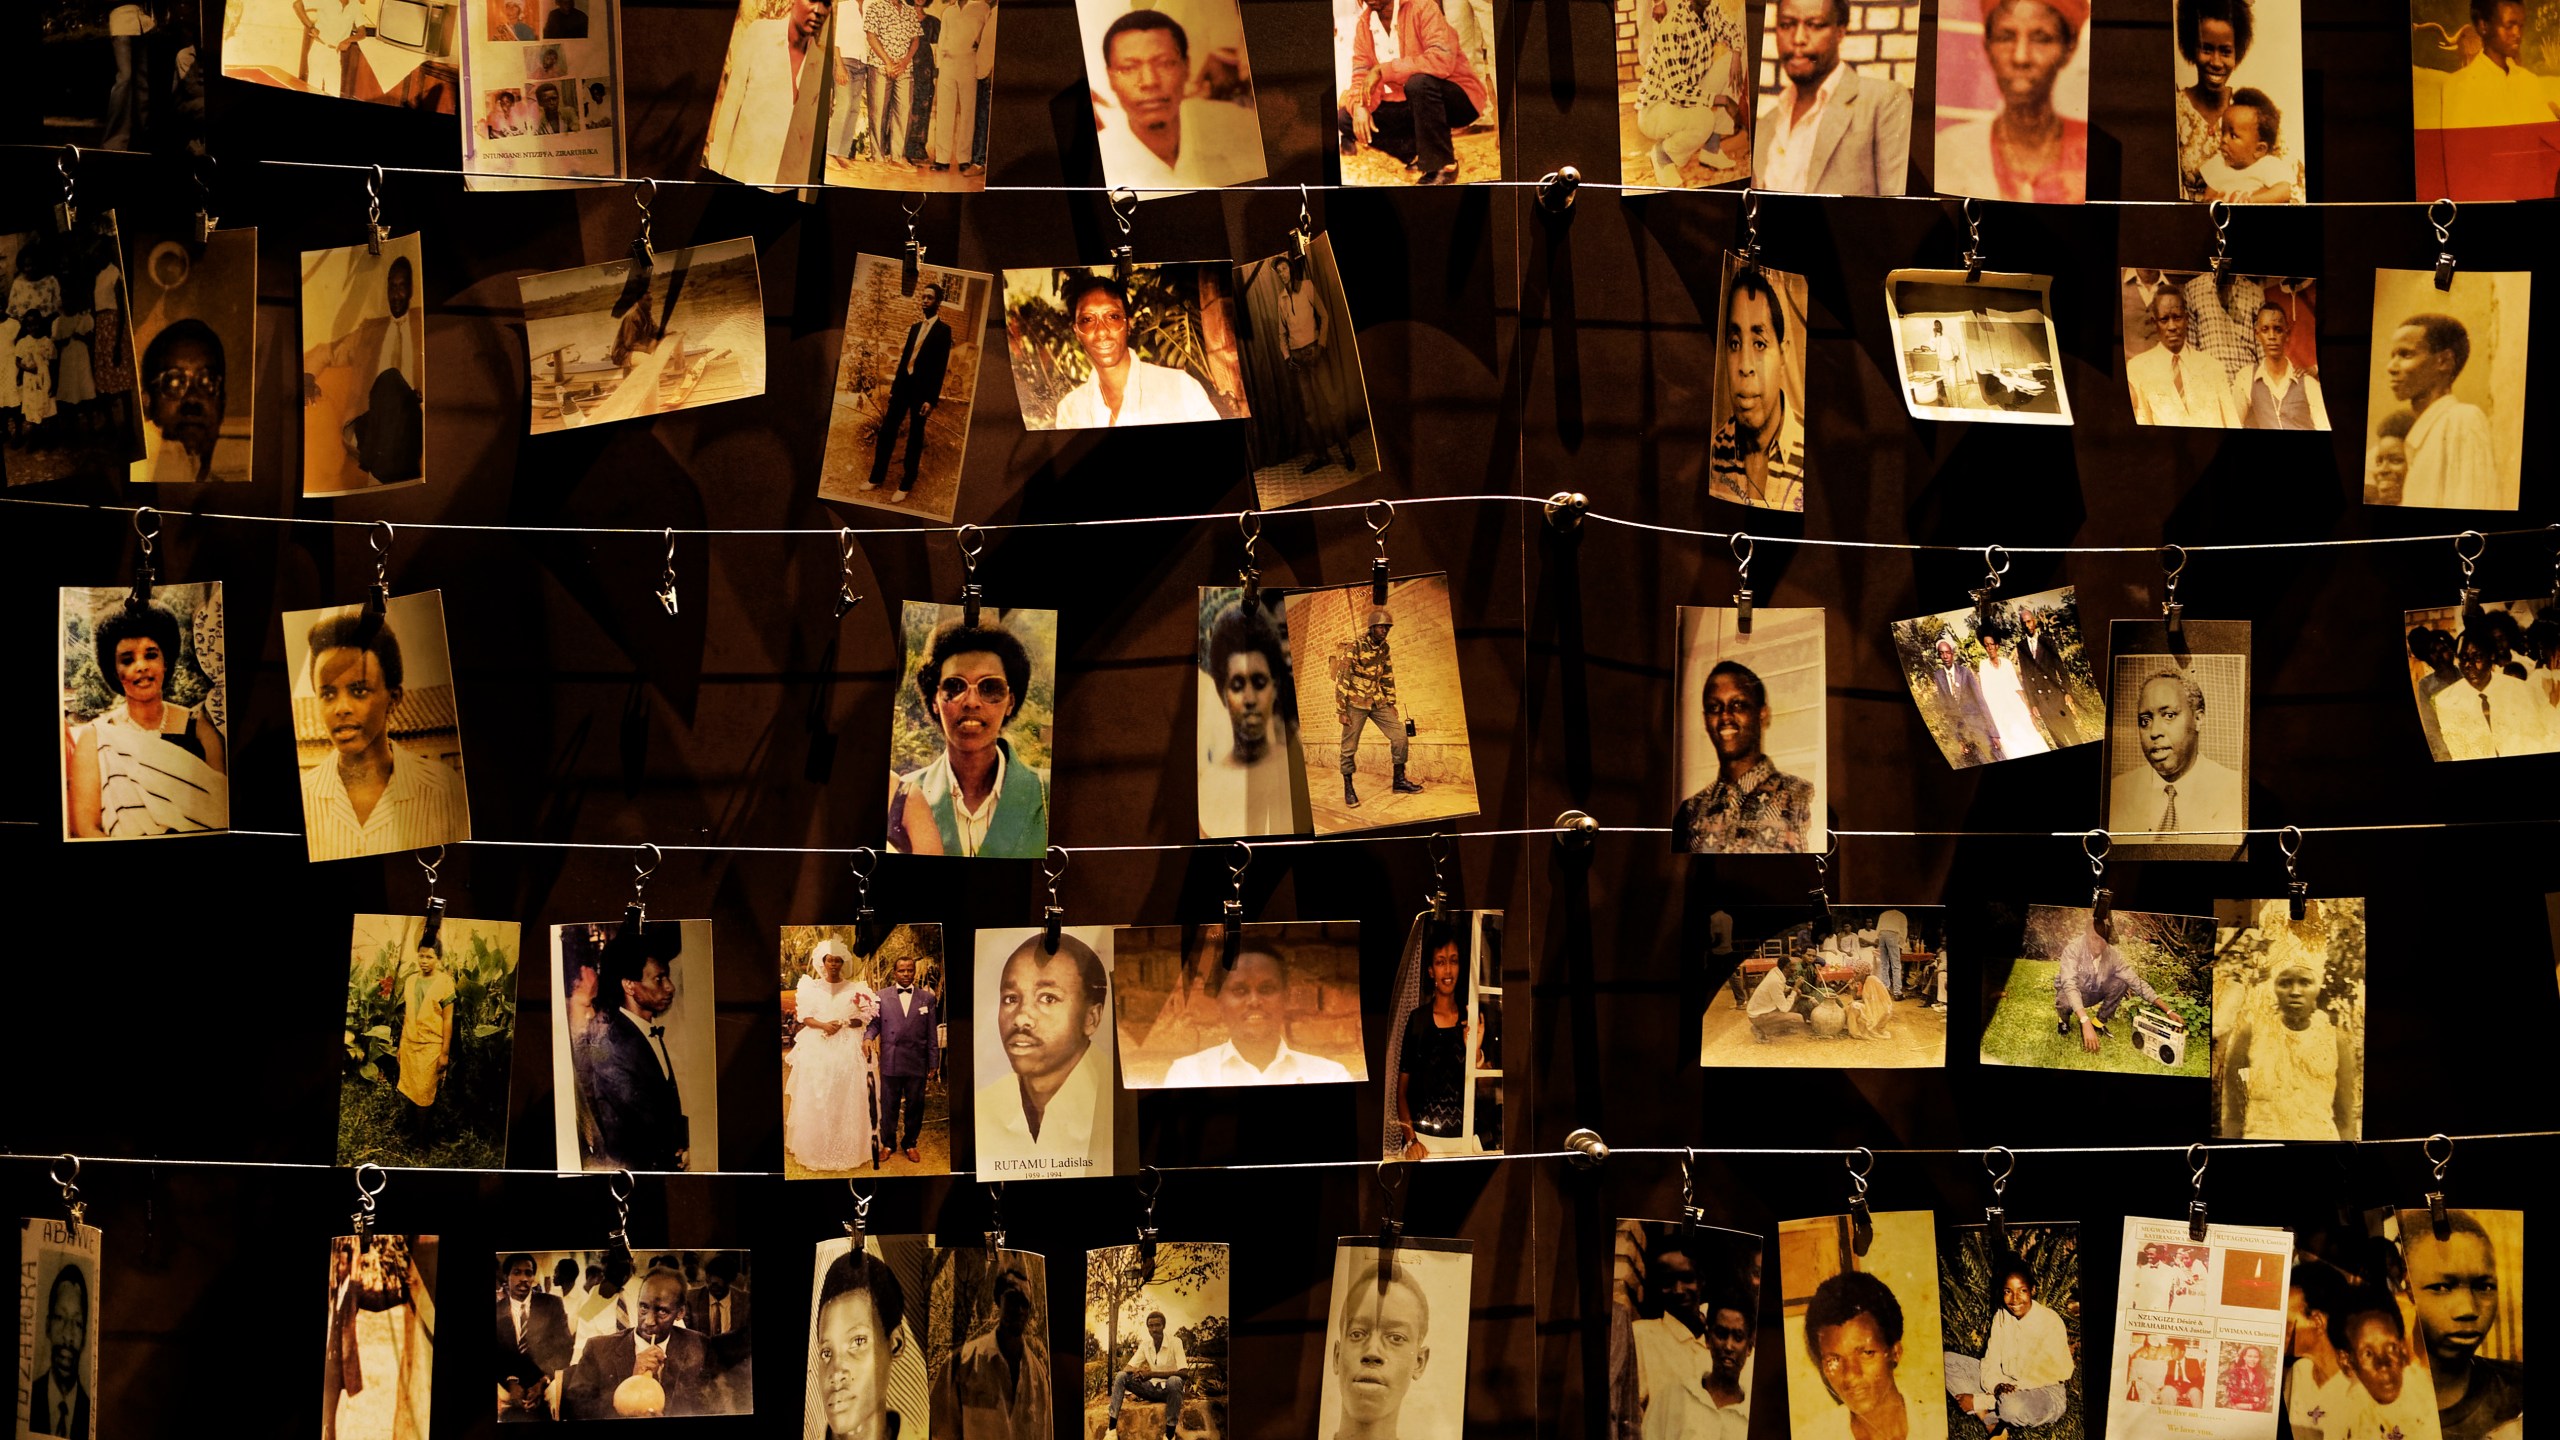 FILE - Family photographs of some of those who died hang on display in an exhibition at the Kigali Genocide Memorial centre in the capital Kigali, Rwanda Friday, April 5, 2019. (AP Photo/Ben Curtis, File)